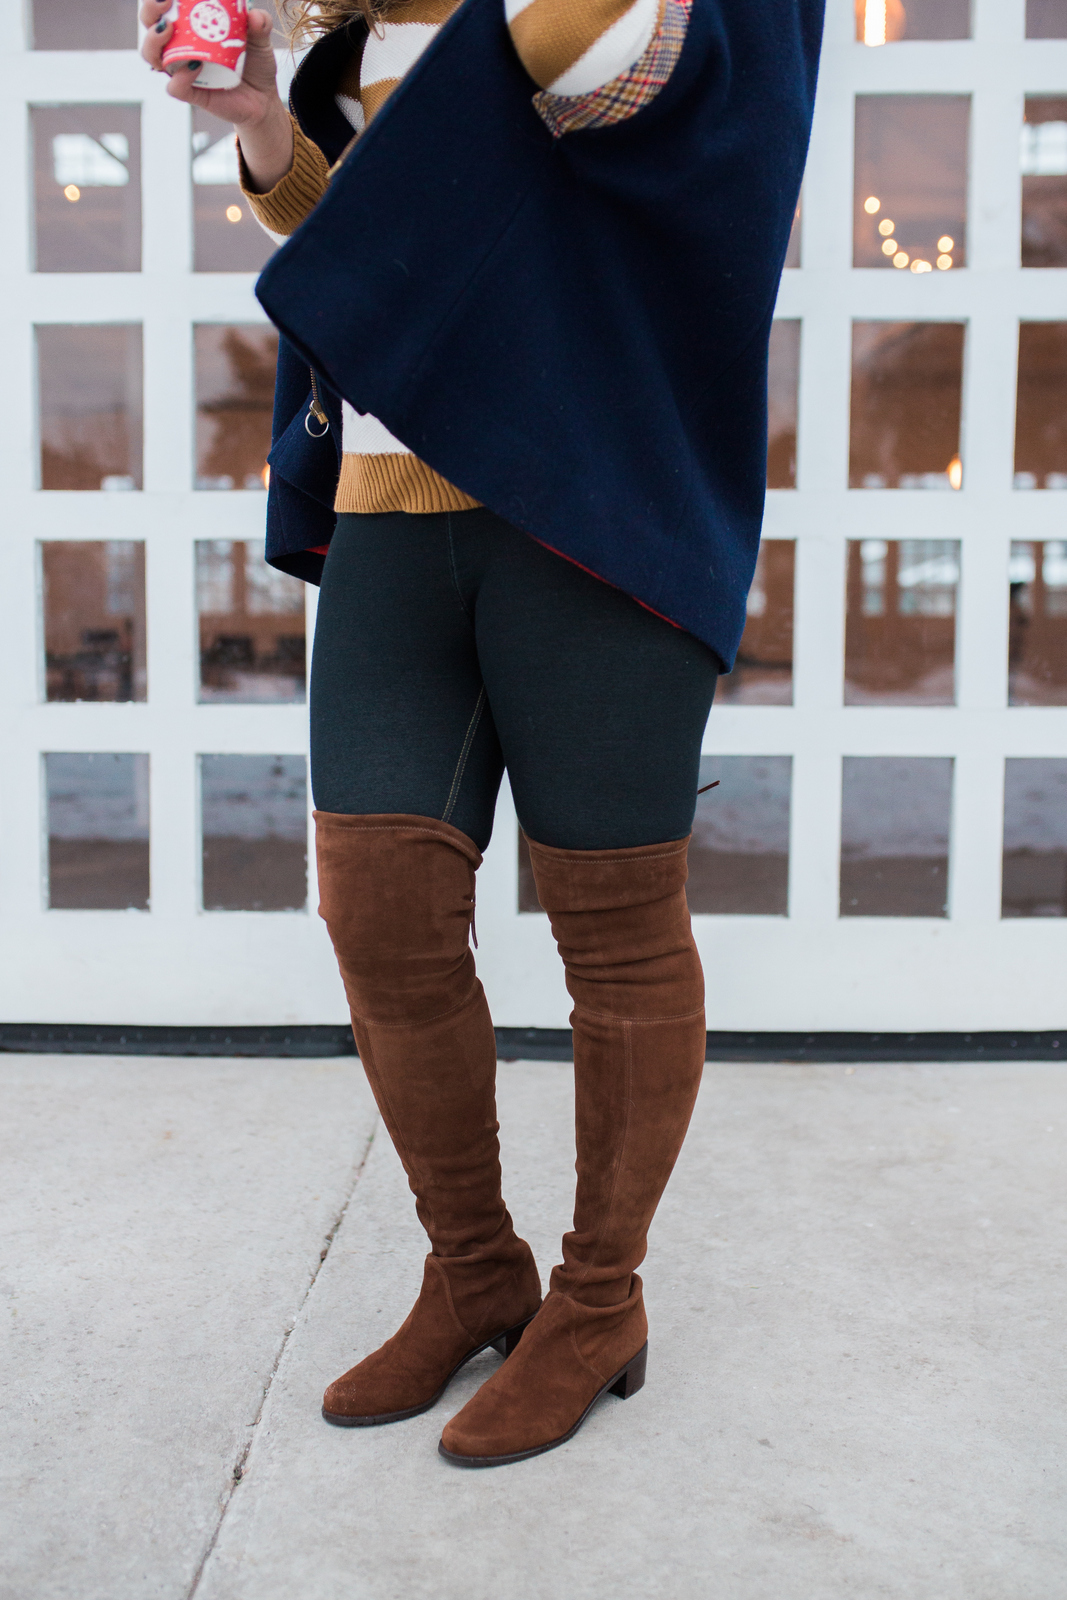 Over the knee boots